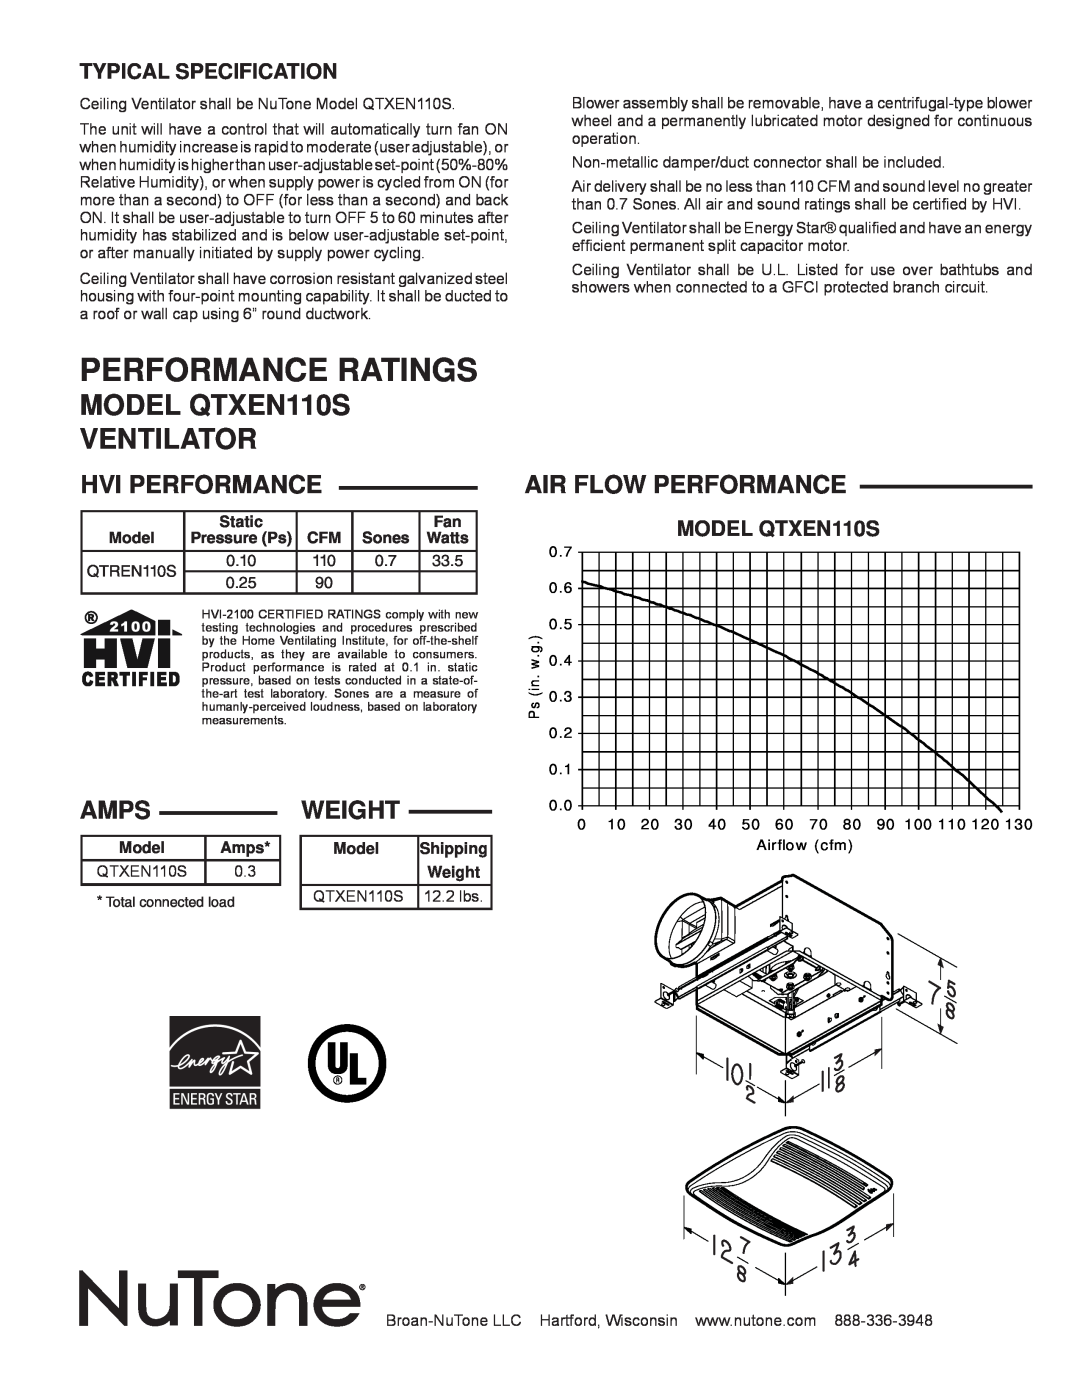 NuTone Hvi Performance, Ampsweight, Air Flow Performance, Typical Specification, MODEL QTXEN110S, Performance Ratings 